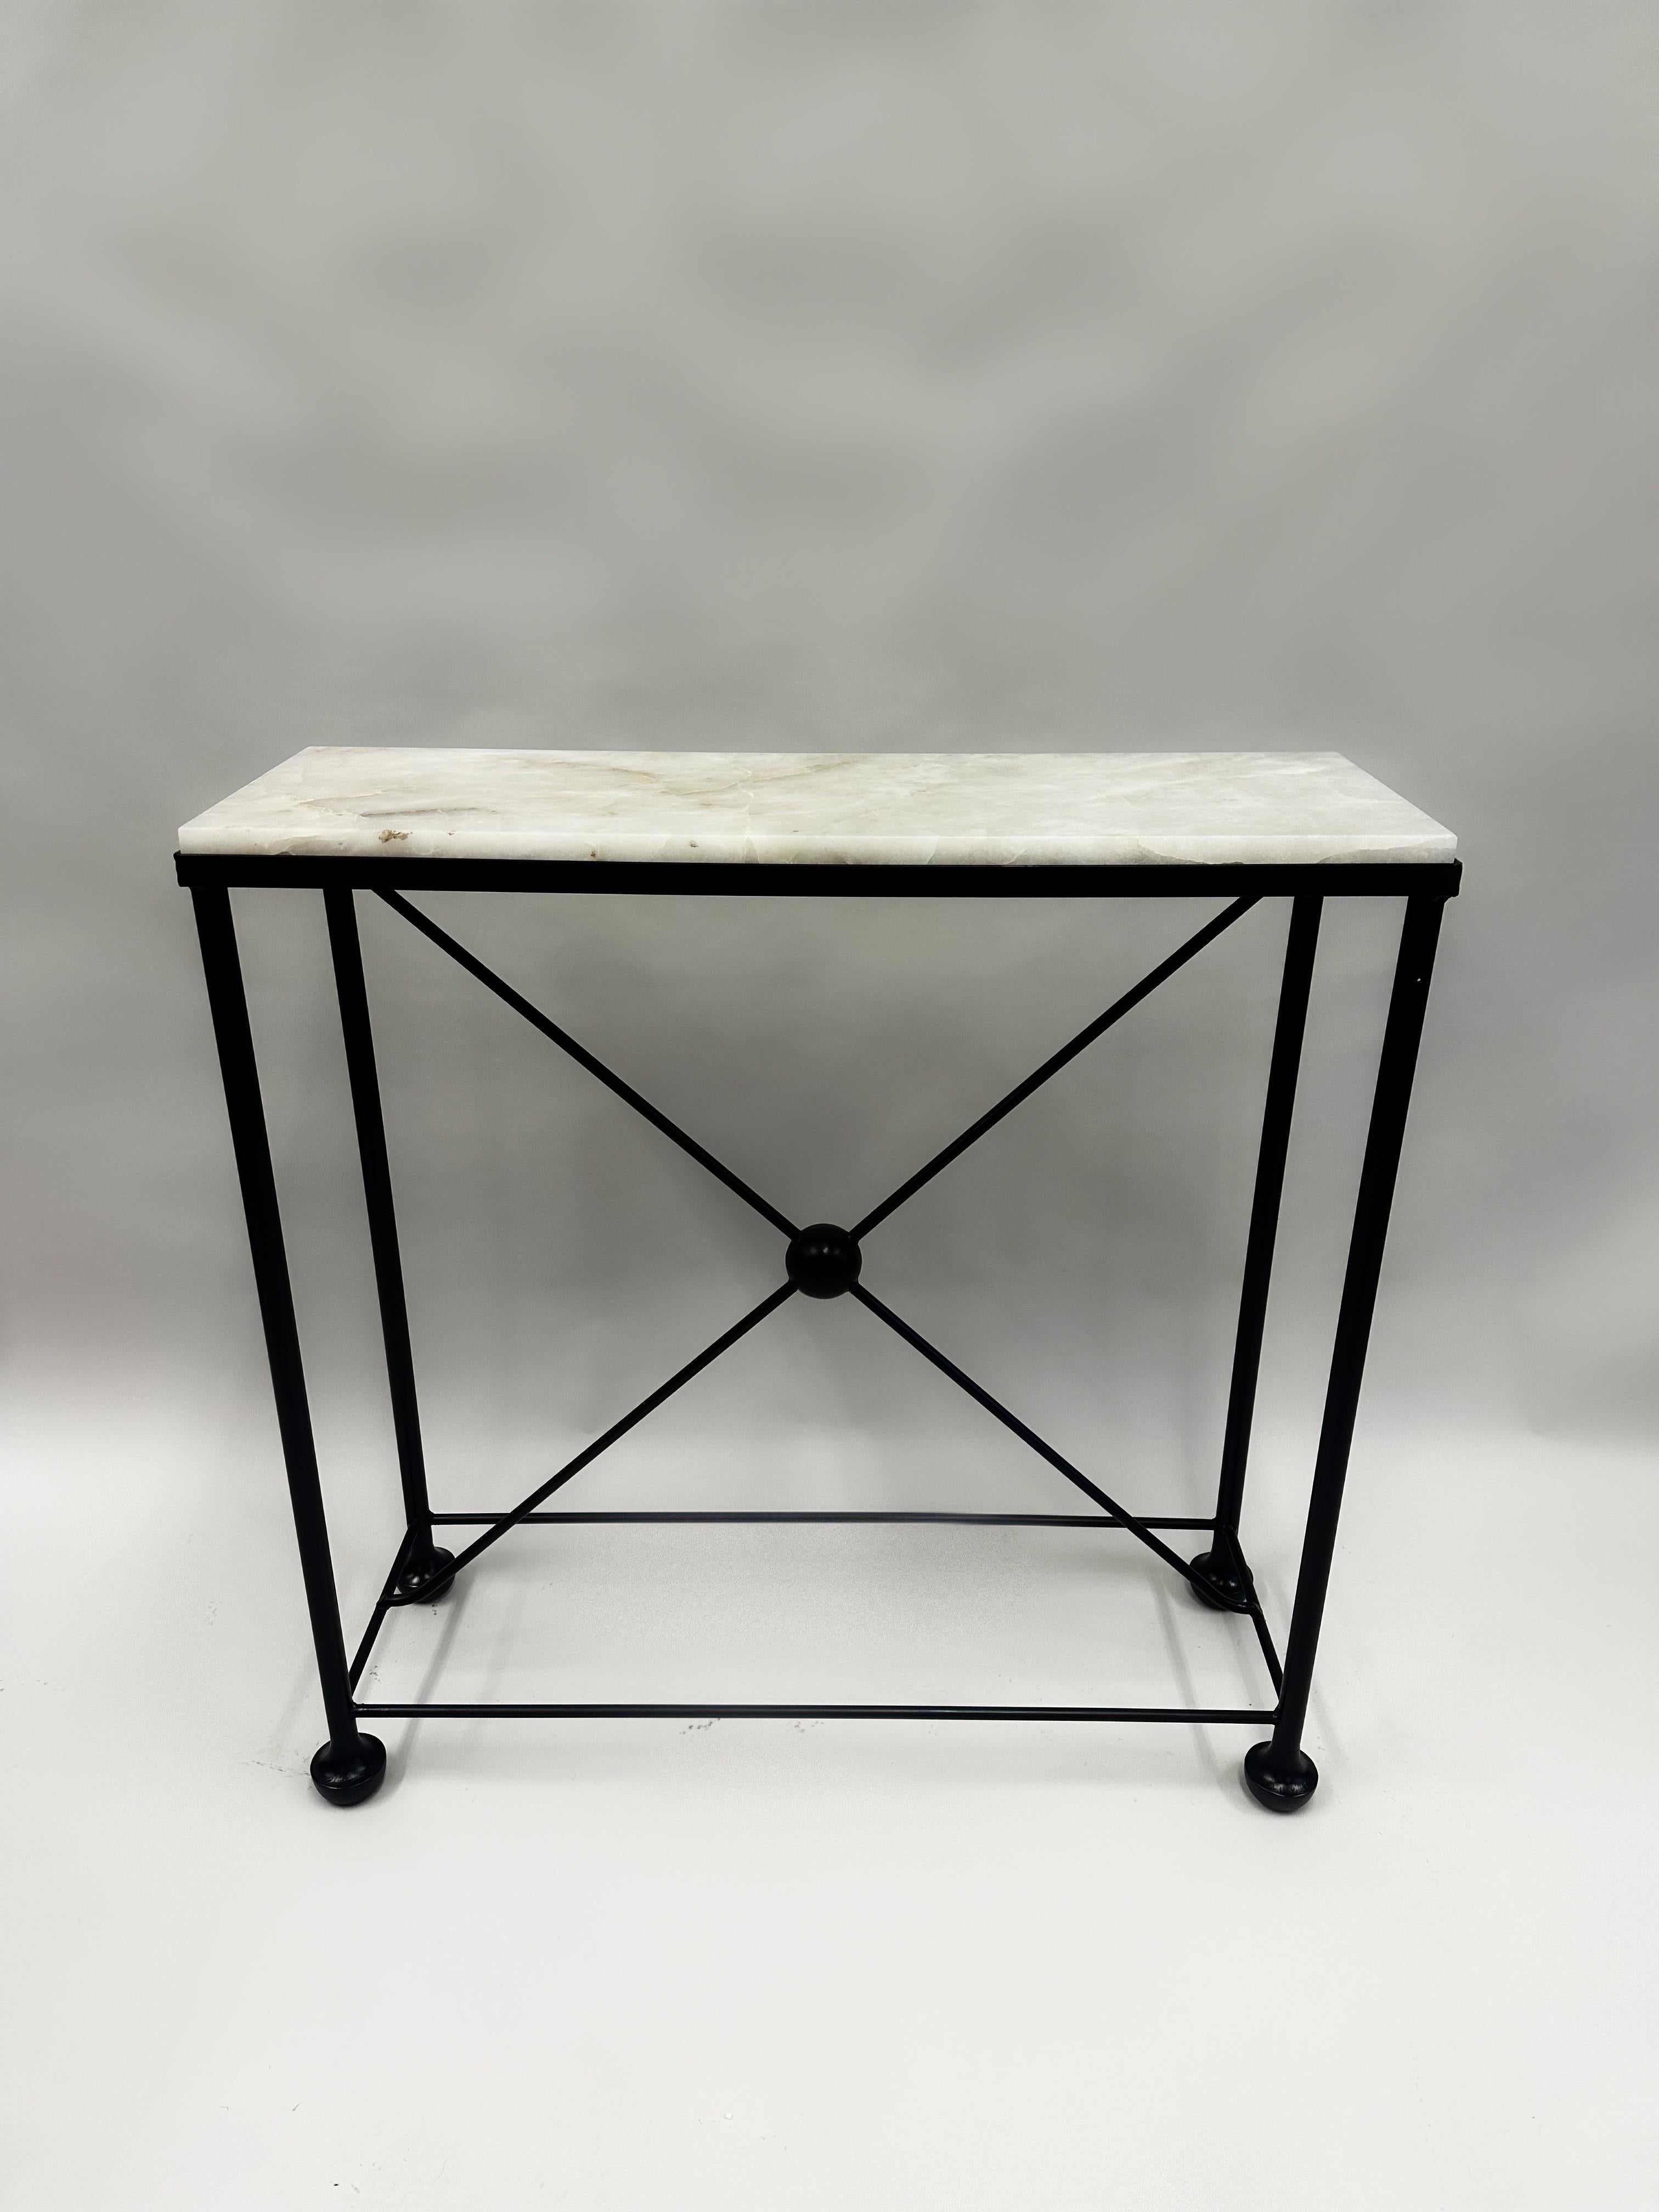 A rare and elegant pair of French mid-century Consoles in the Modern Neoclassical Spirit and composed of patinated wrought iron bases supporting solid slabs of pure rock crystal. Each console is priced and sold individually and reflect the style of